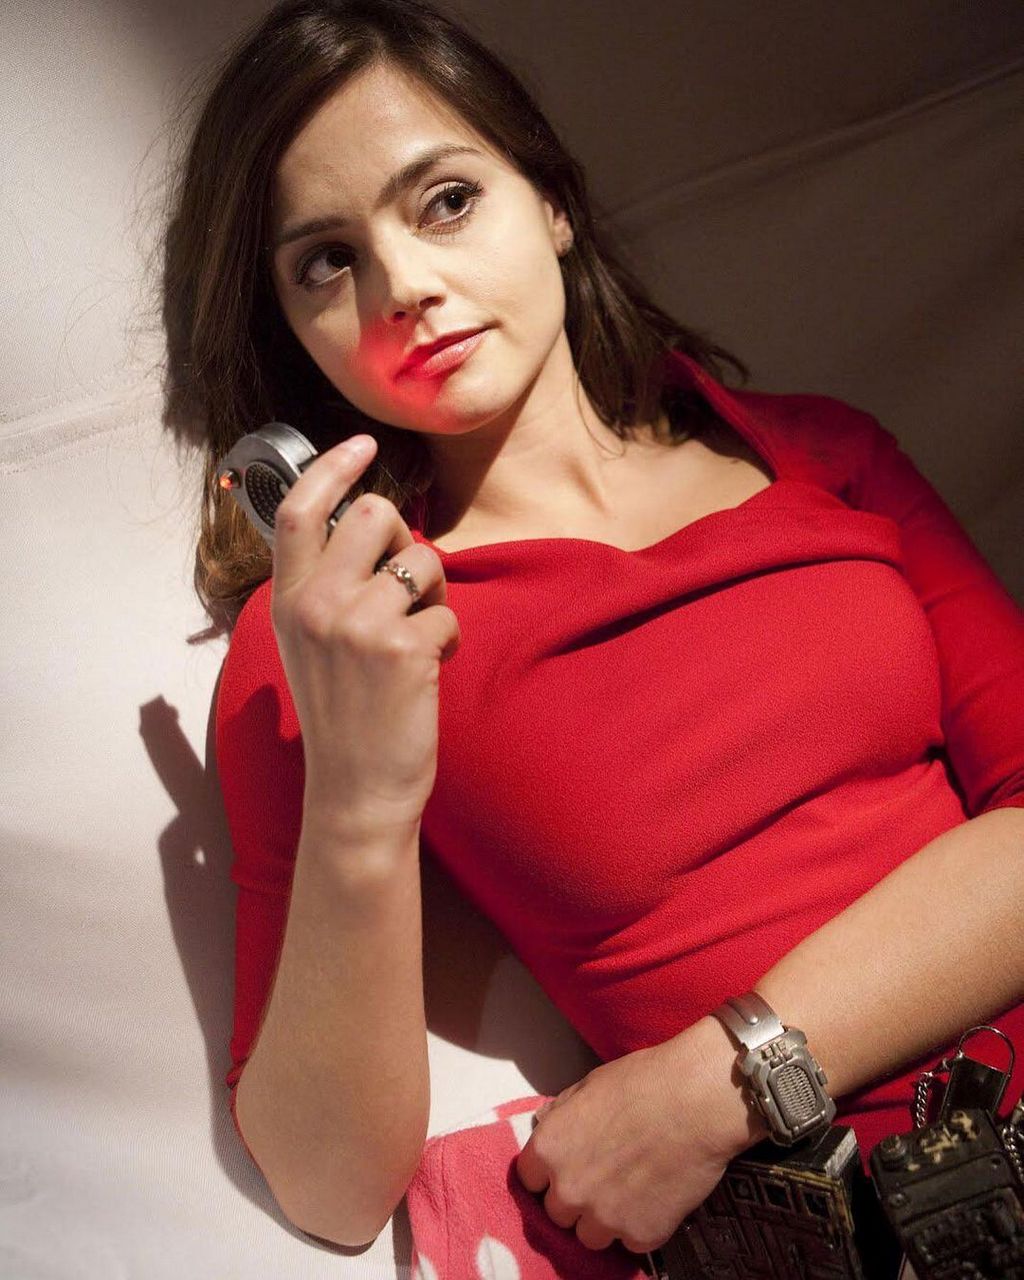 Jenna Coleman Is Wife Material Imagine The Sex Youd Have With Her After A Long Hard Day At Work NSFW